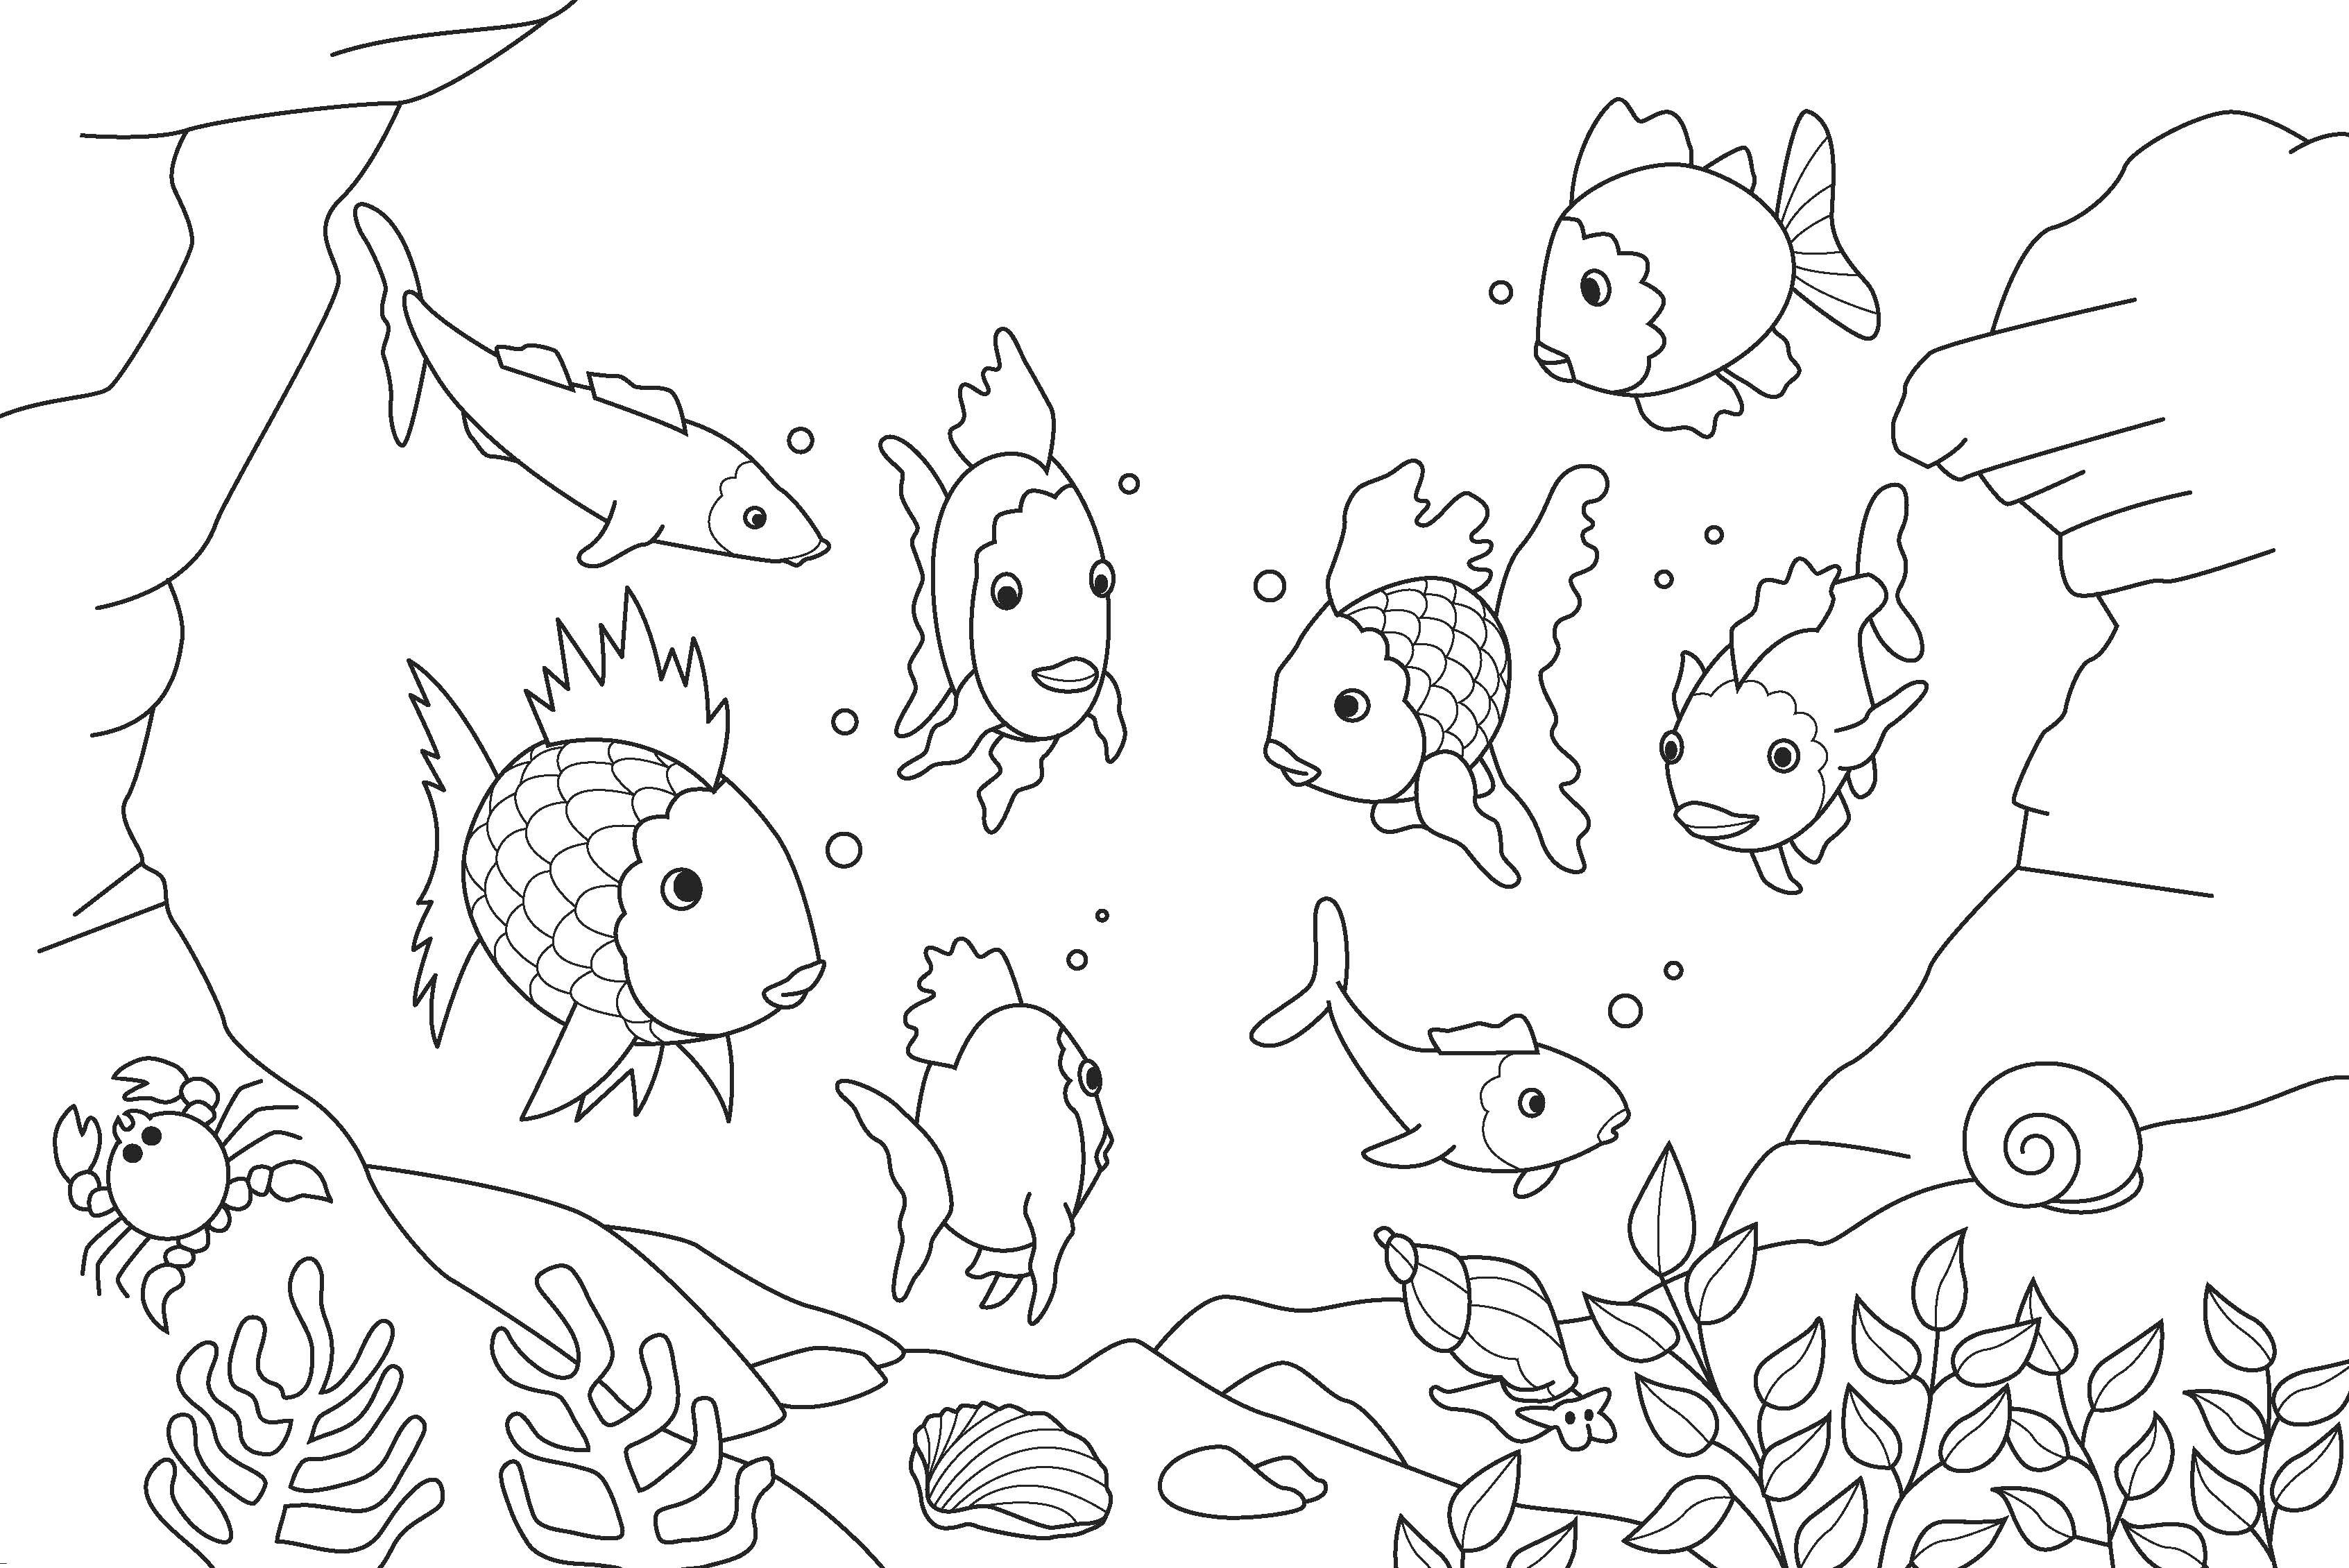 Coloring Underwater world. Category The ocean. Tags:  Underwater world.